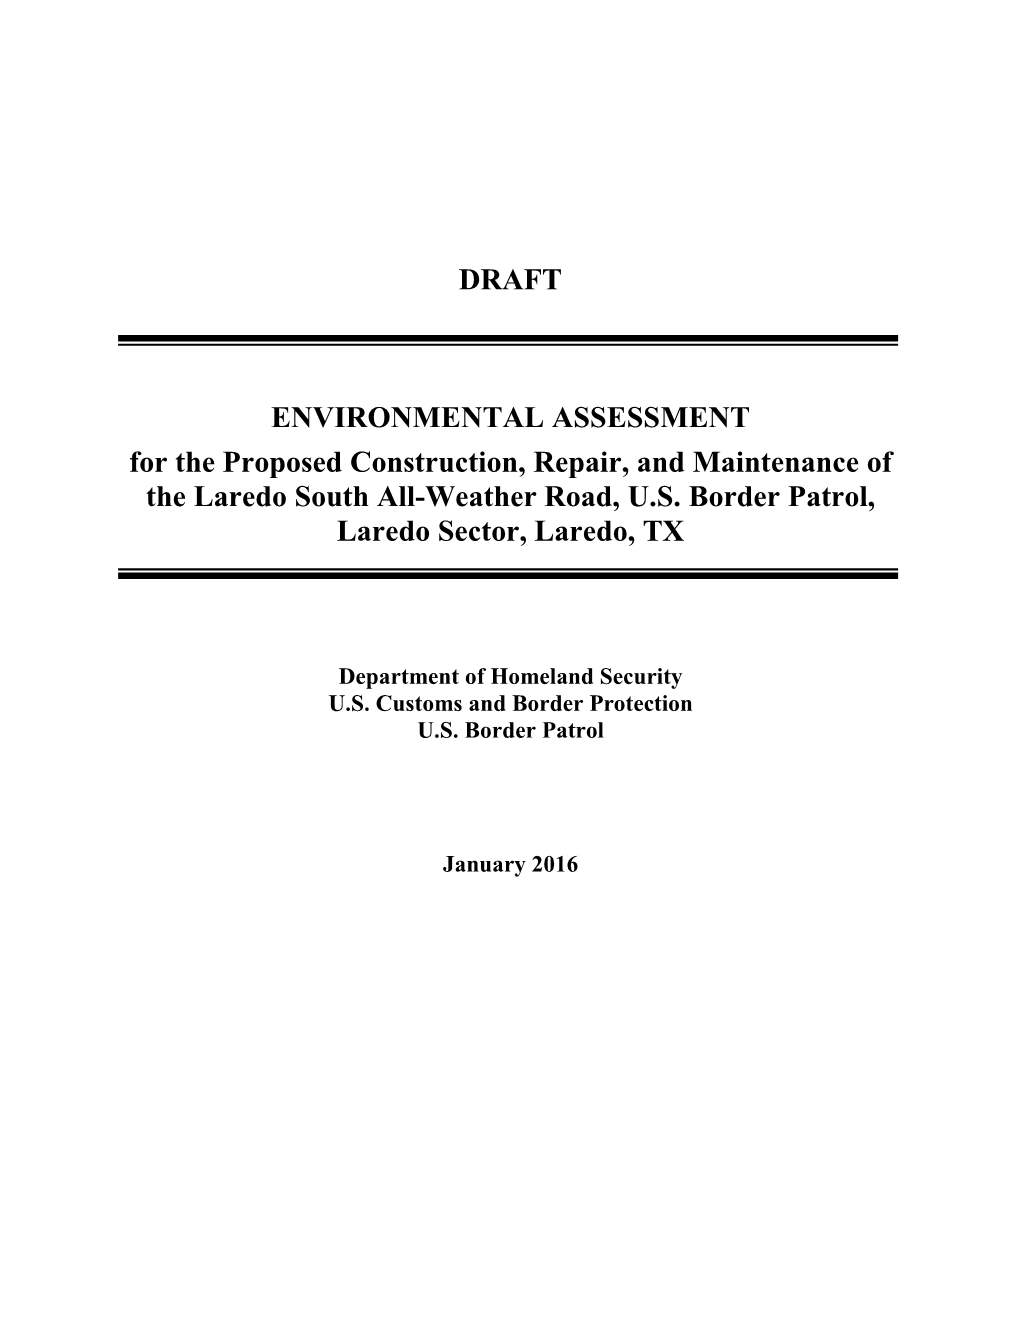 DRAFT ENVIRONMENTAL ASSESSMENT for the Proposed